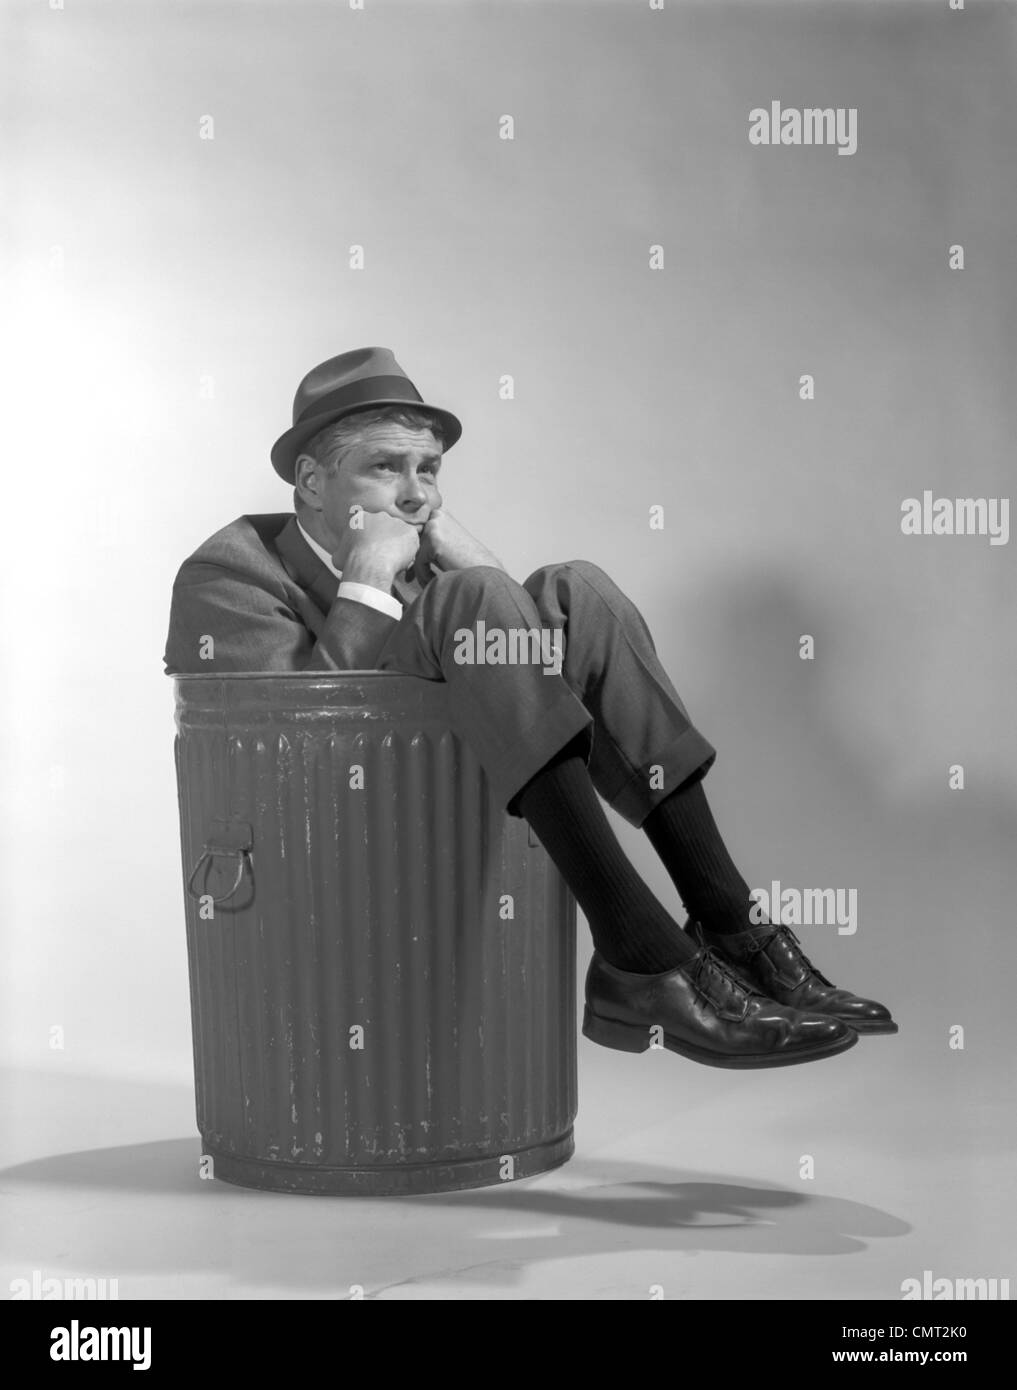 1960s BUSINESSMAN IN SUIT AND HAT SITTING IN TRASHCAN Stock Photo